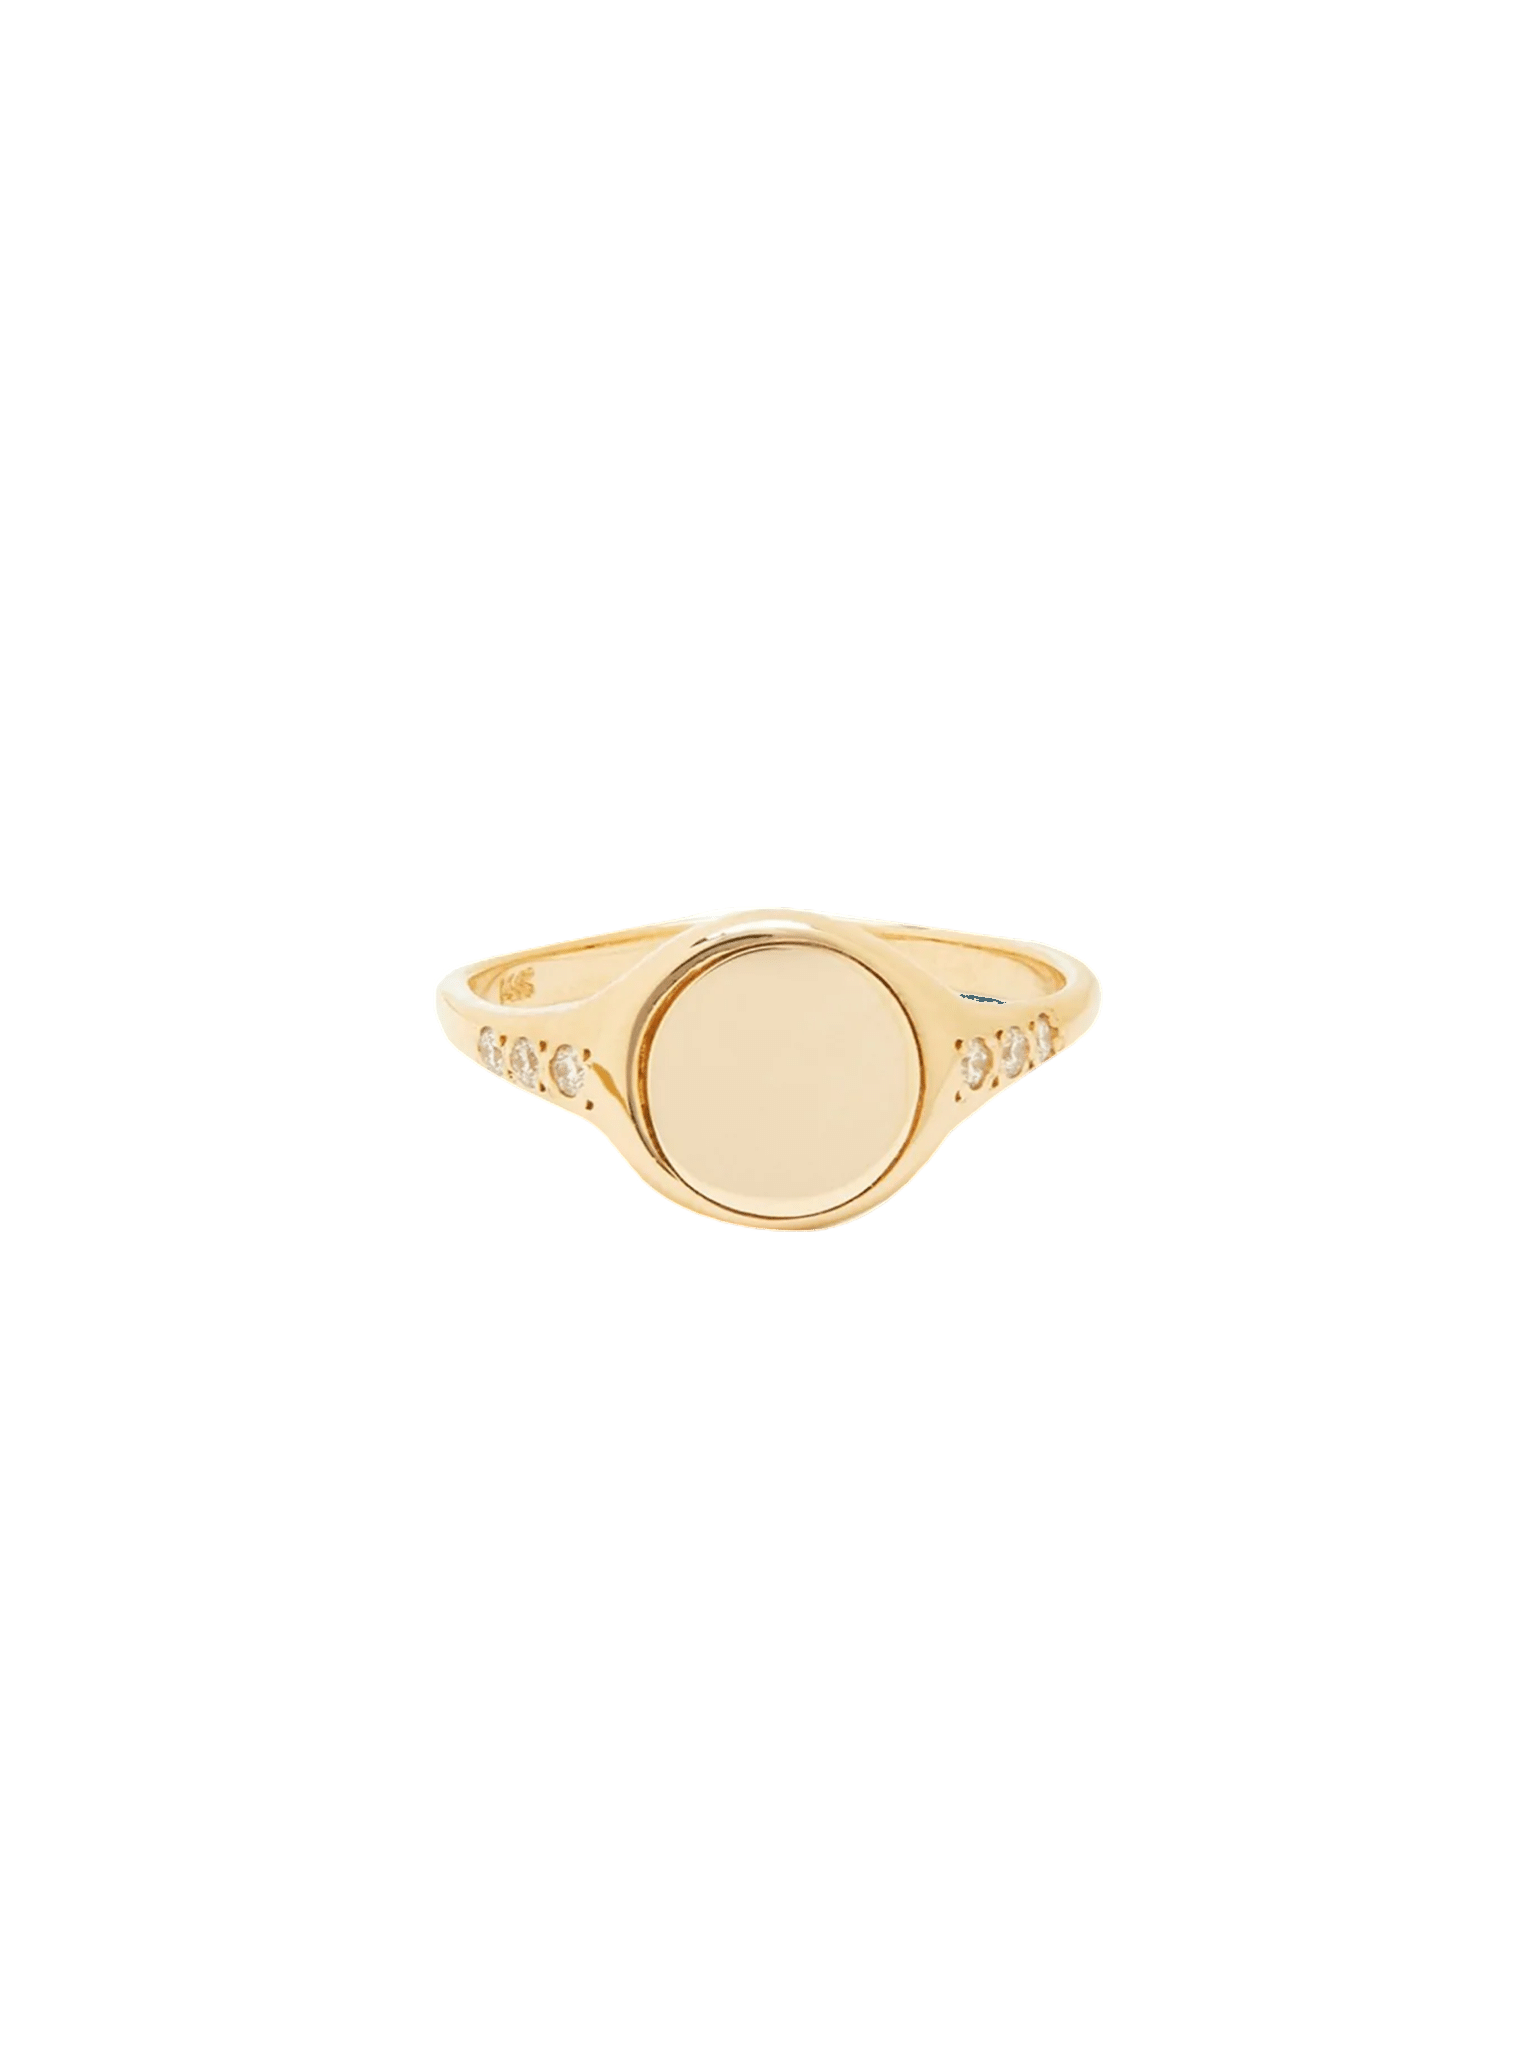 The classic signet ring